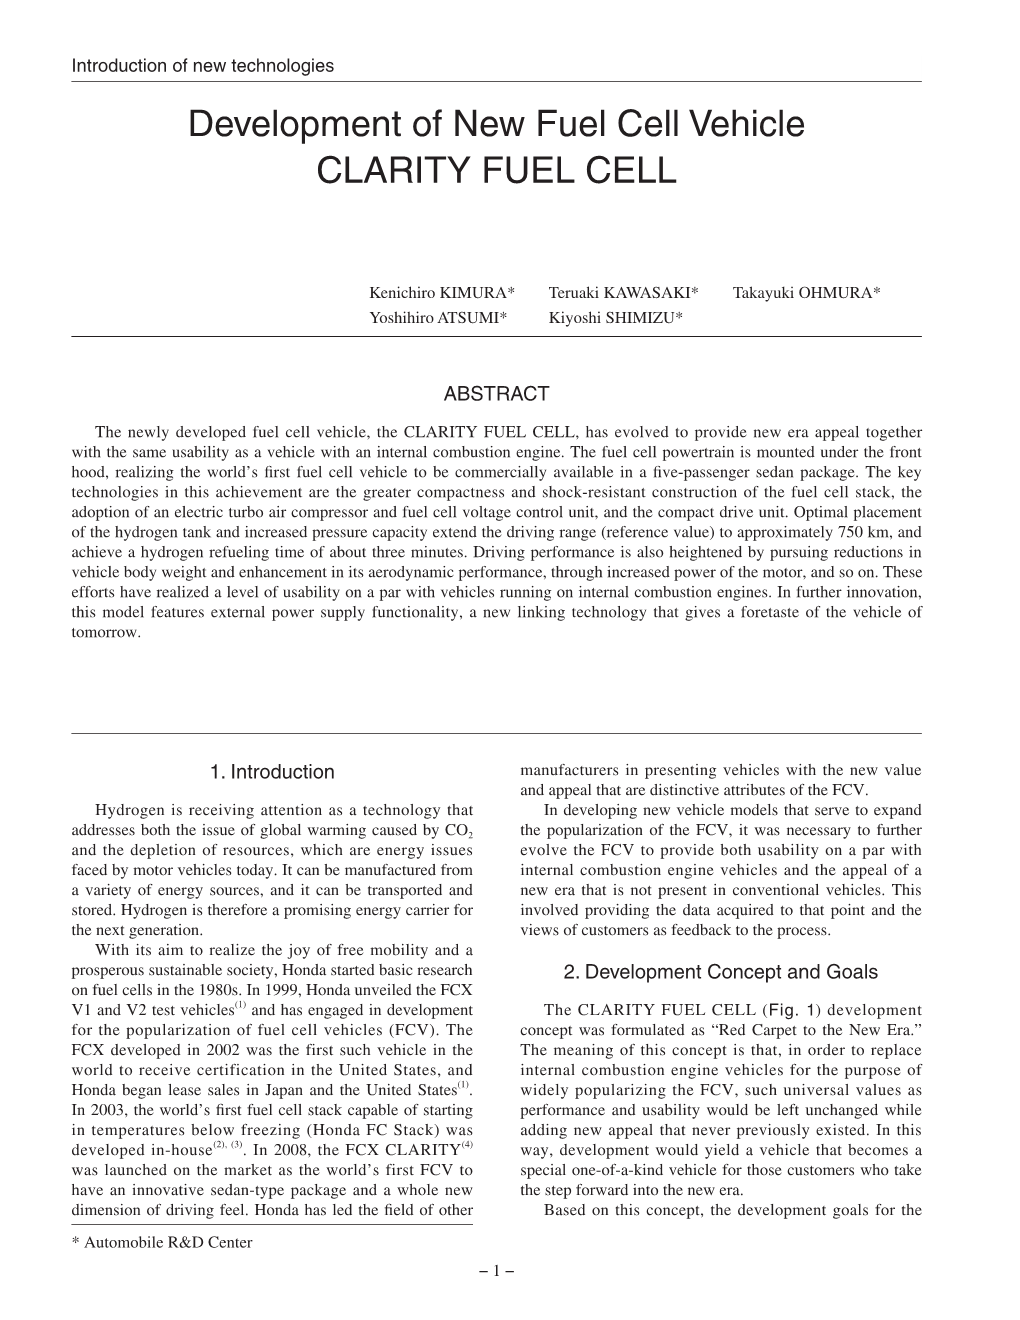 Development of New Fuel Cell Vehicle CLARITY FUEL CELL Development of New Fuel Cell Vehicle CLARITY FUEL CELL